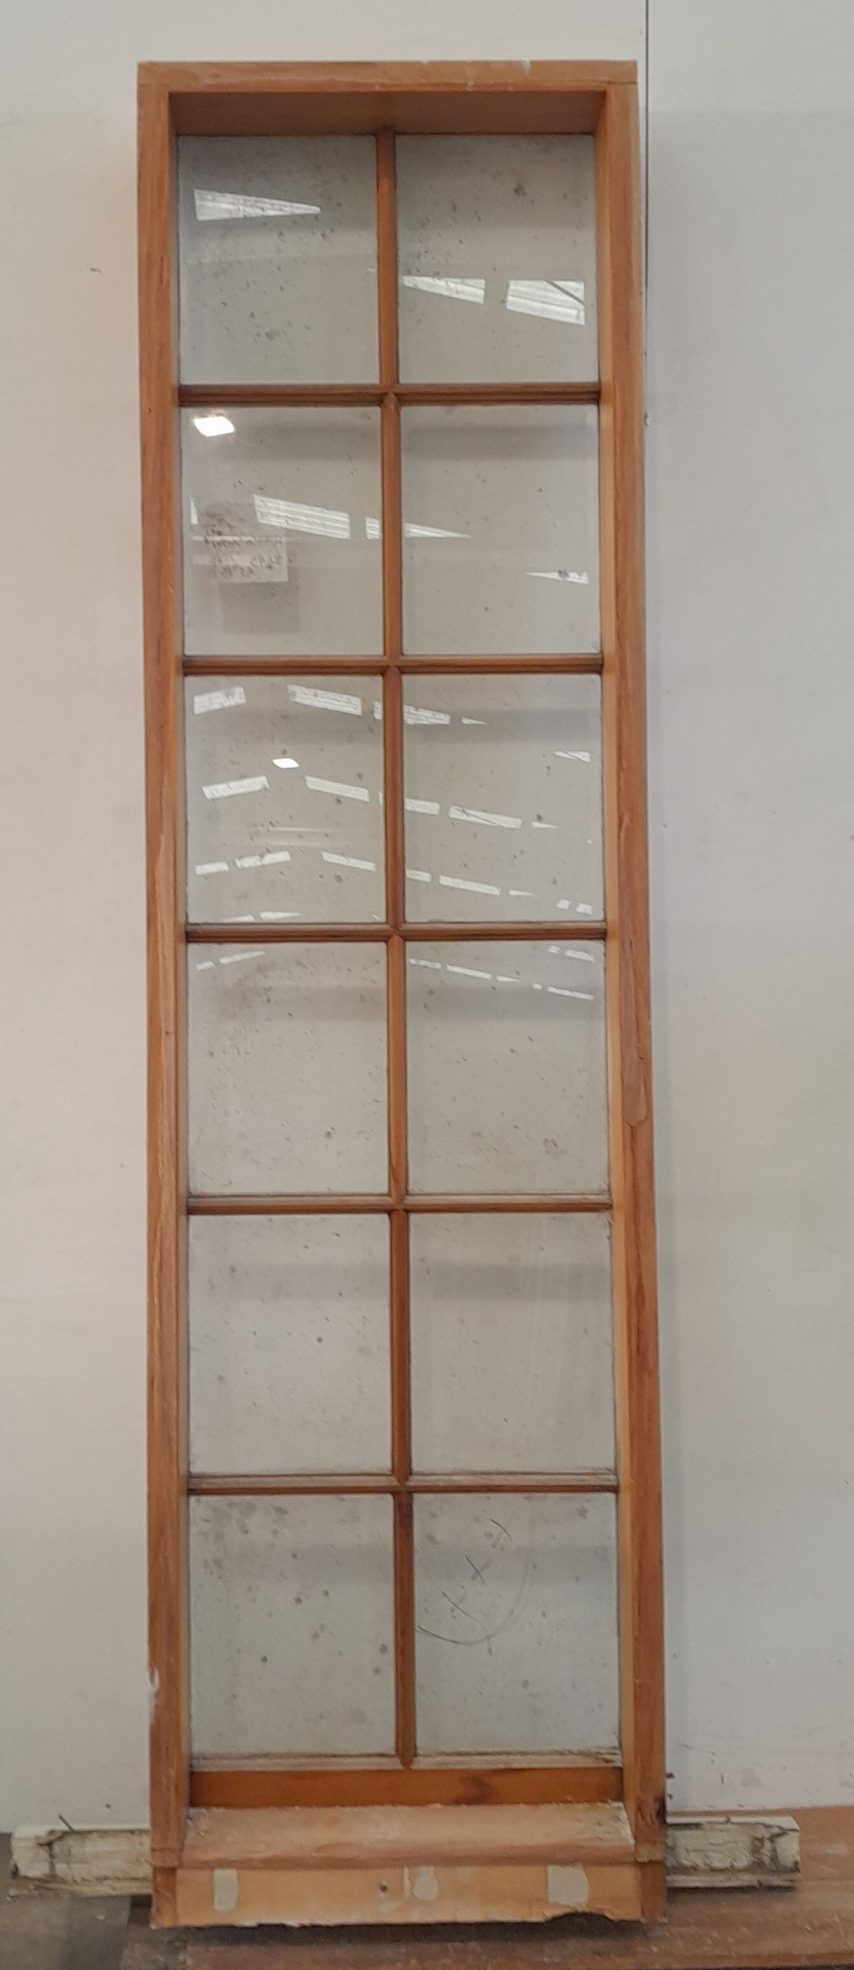 Wooden Colonial style fixed window